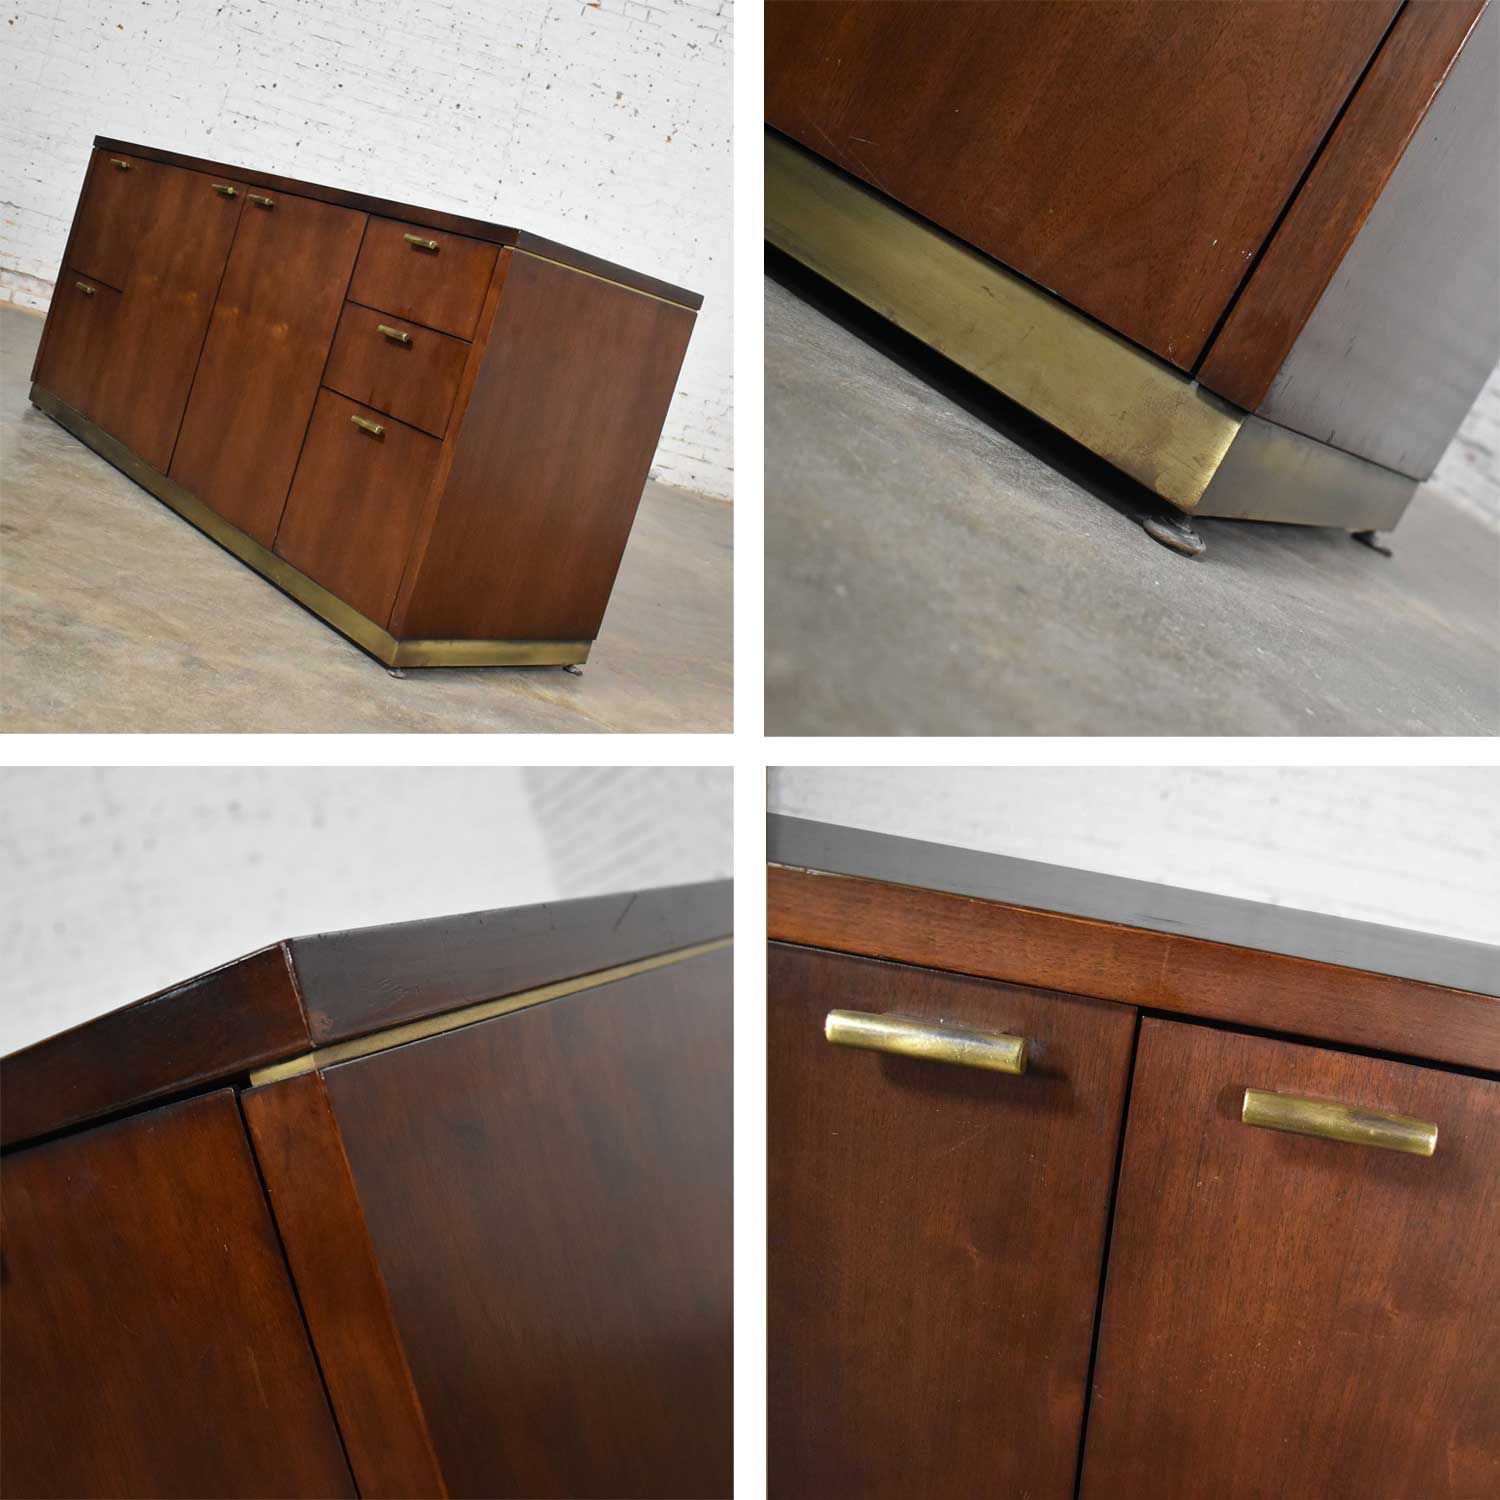 Large Mid Century Modern Cantilever Executive Desk & Credenza by Myrtle Desk Company